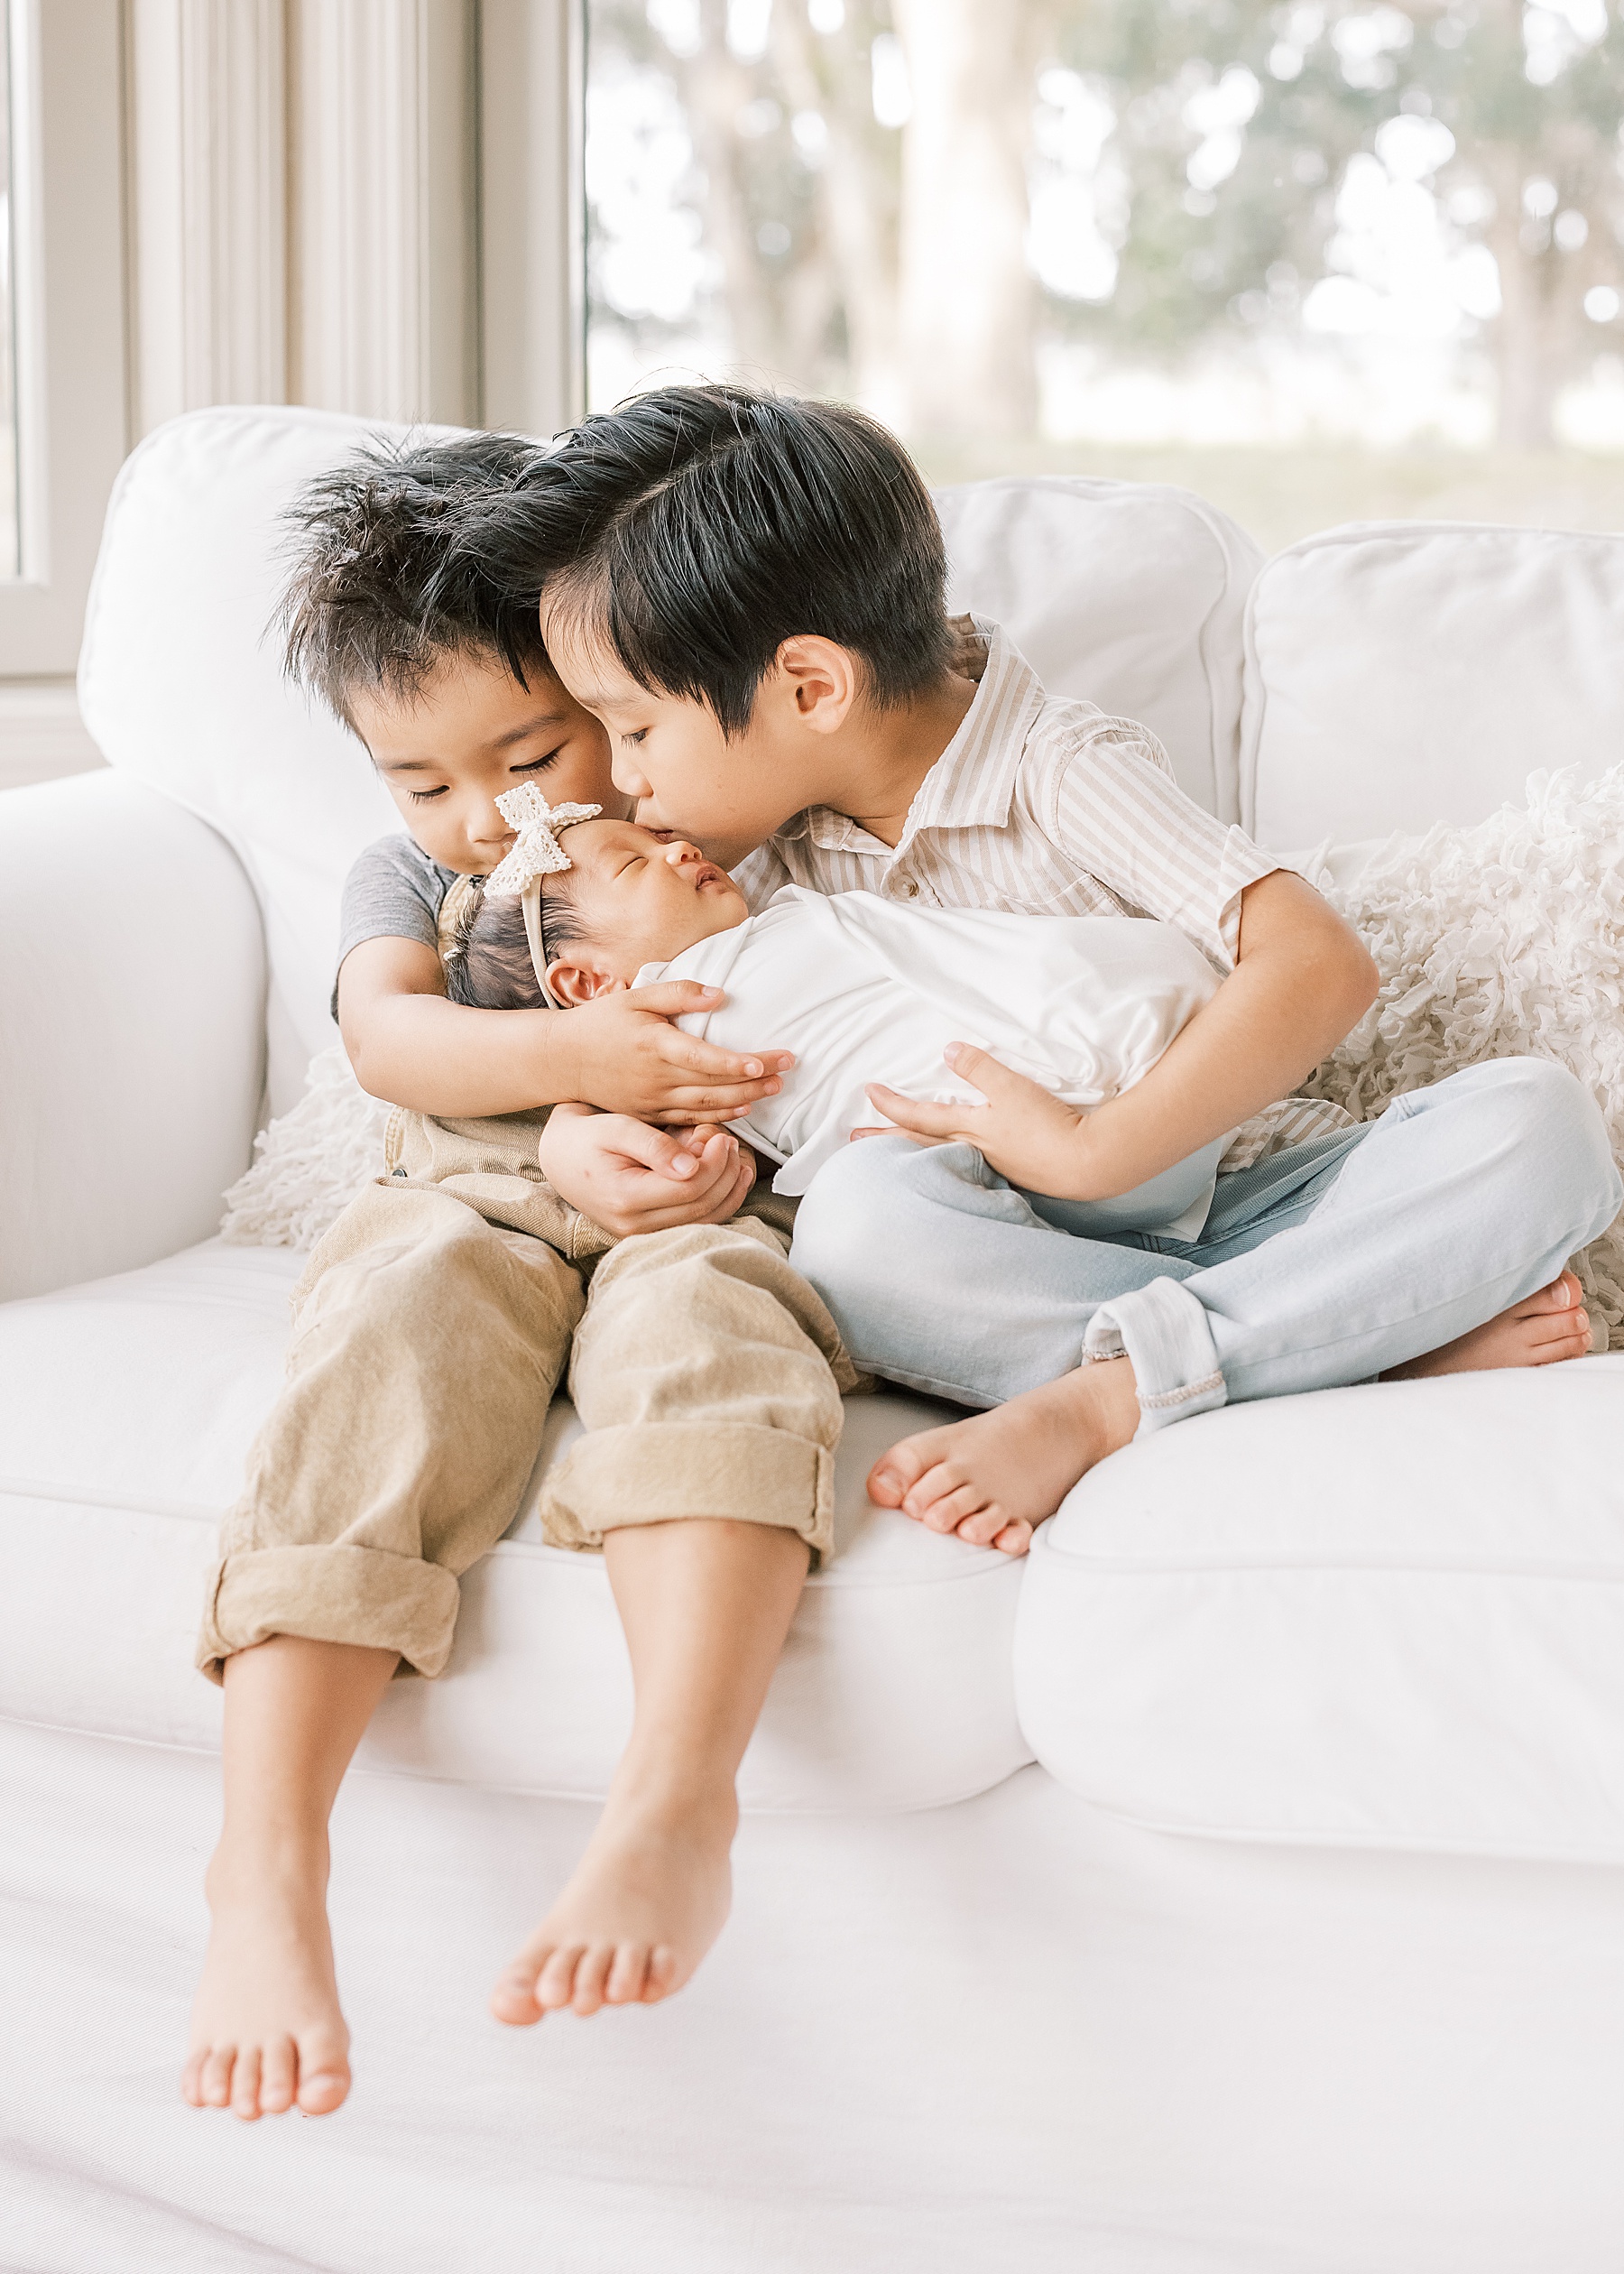 little boys dressed in neutral colors sitting on white couch kissing newborn baby sister